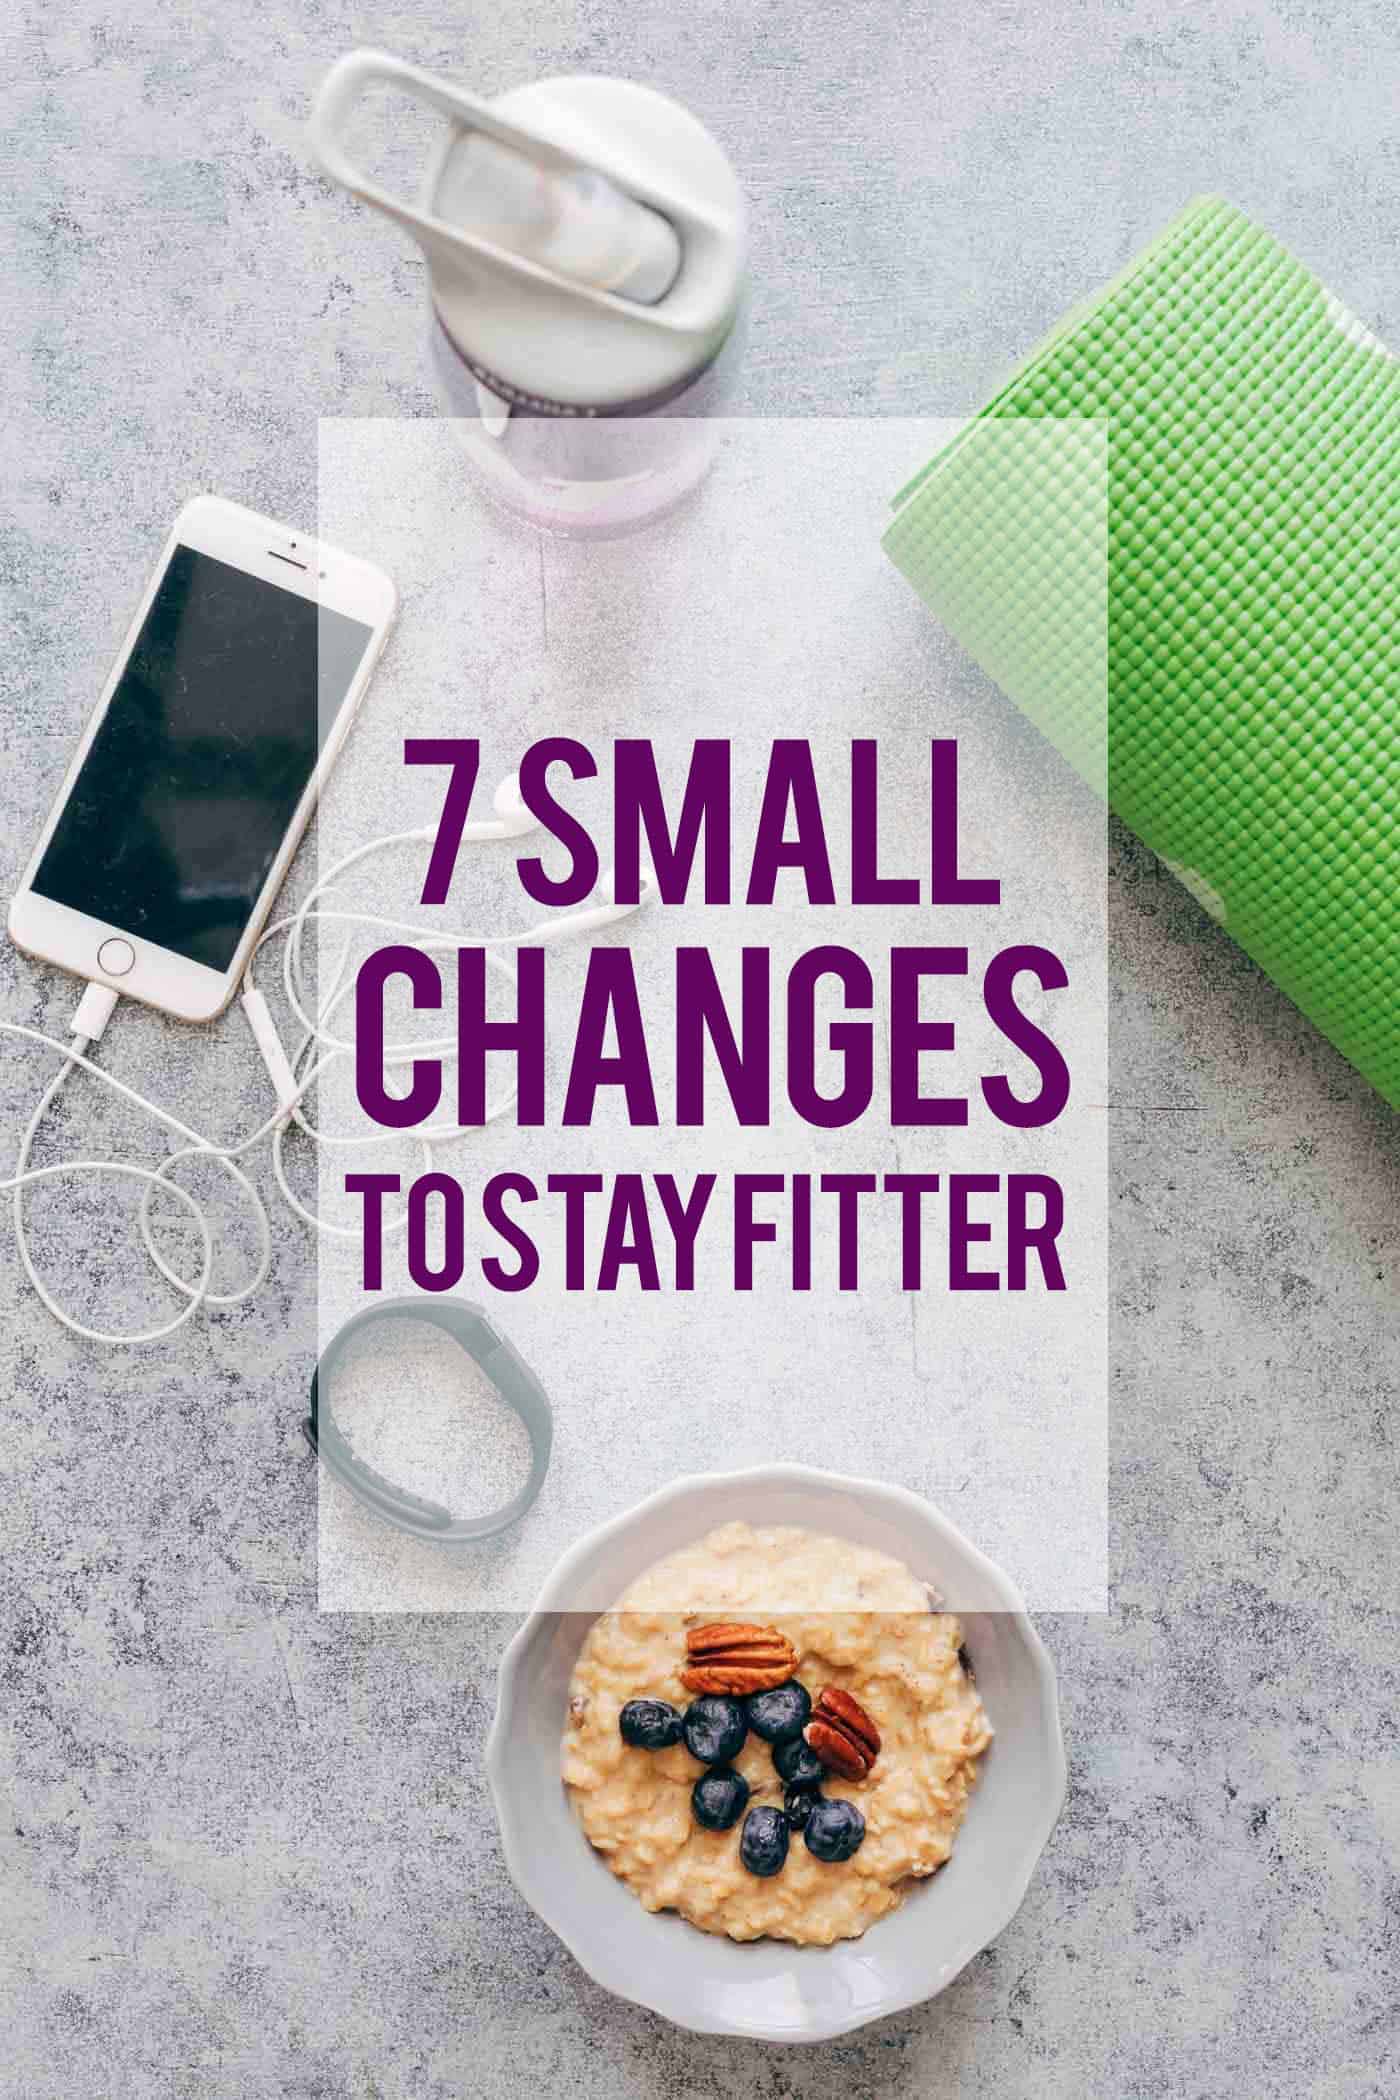 These 7 small lifestyle changes to stay fit can be easily incorporated in your every day life and can help you become healthier without any big commitments.